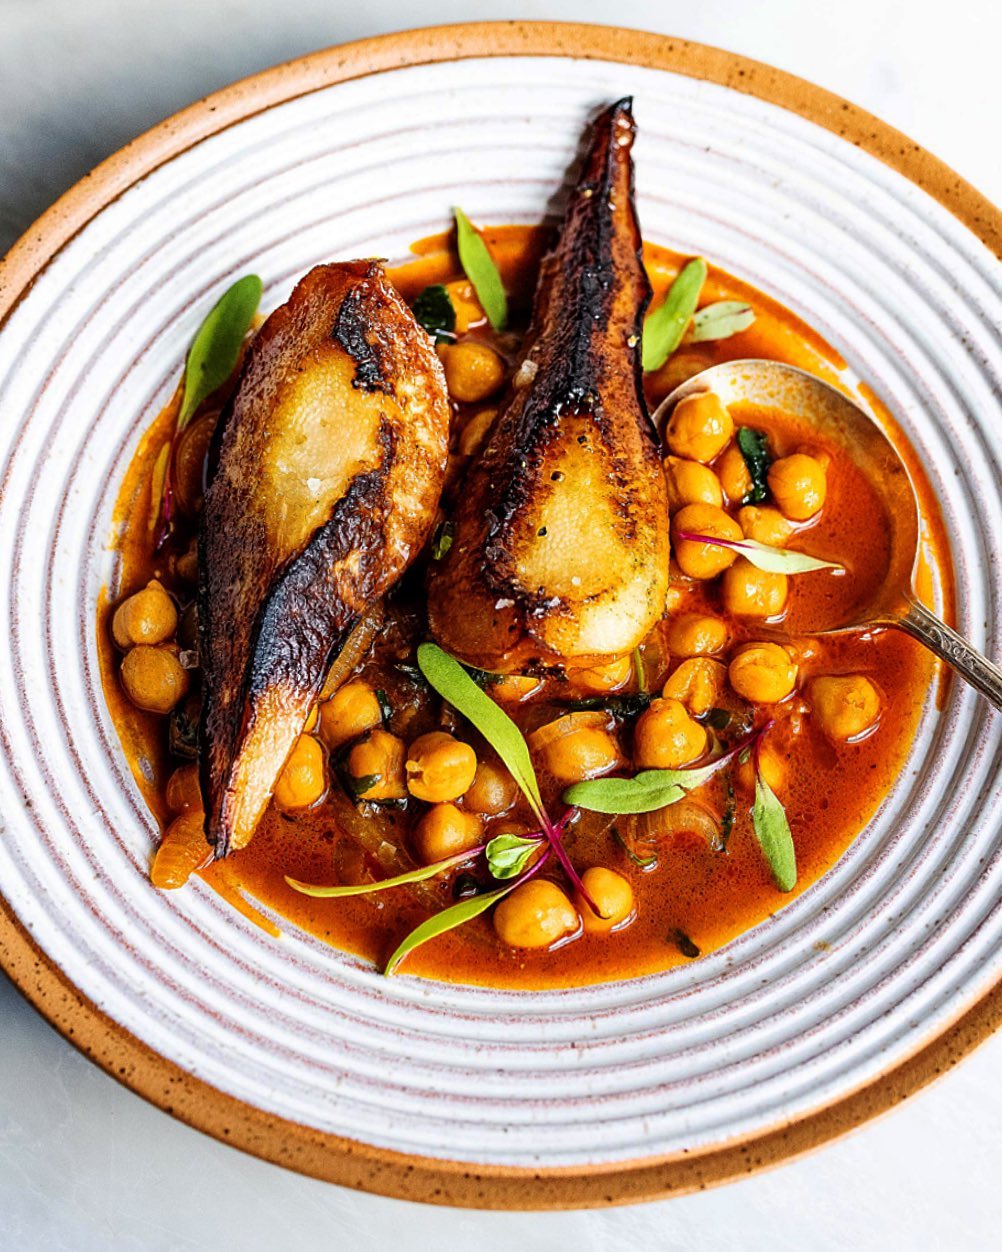 How to prepare Charred Pears with Harissa Chickpeas